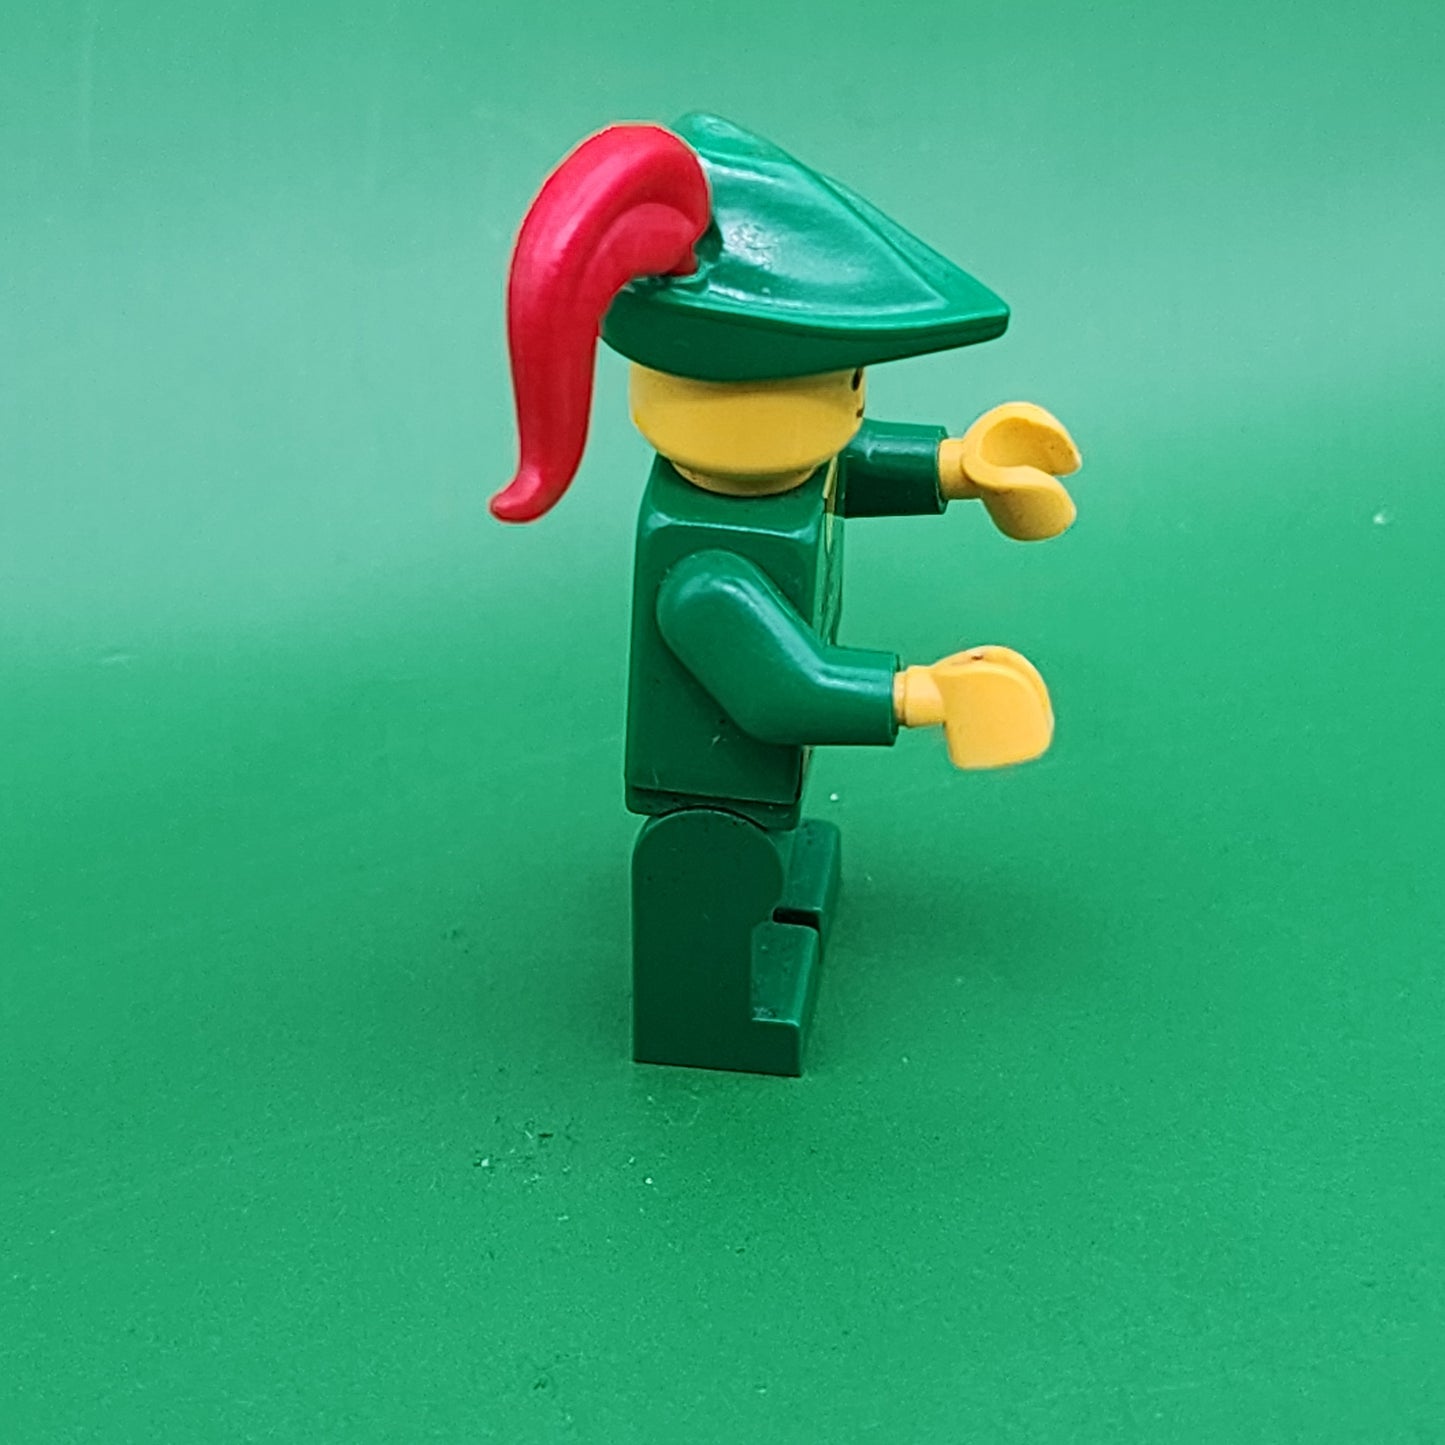 Lego Forestman Minifigure Pouch, Green Hat, Red Plume cas126 Castle